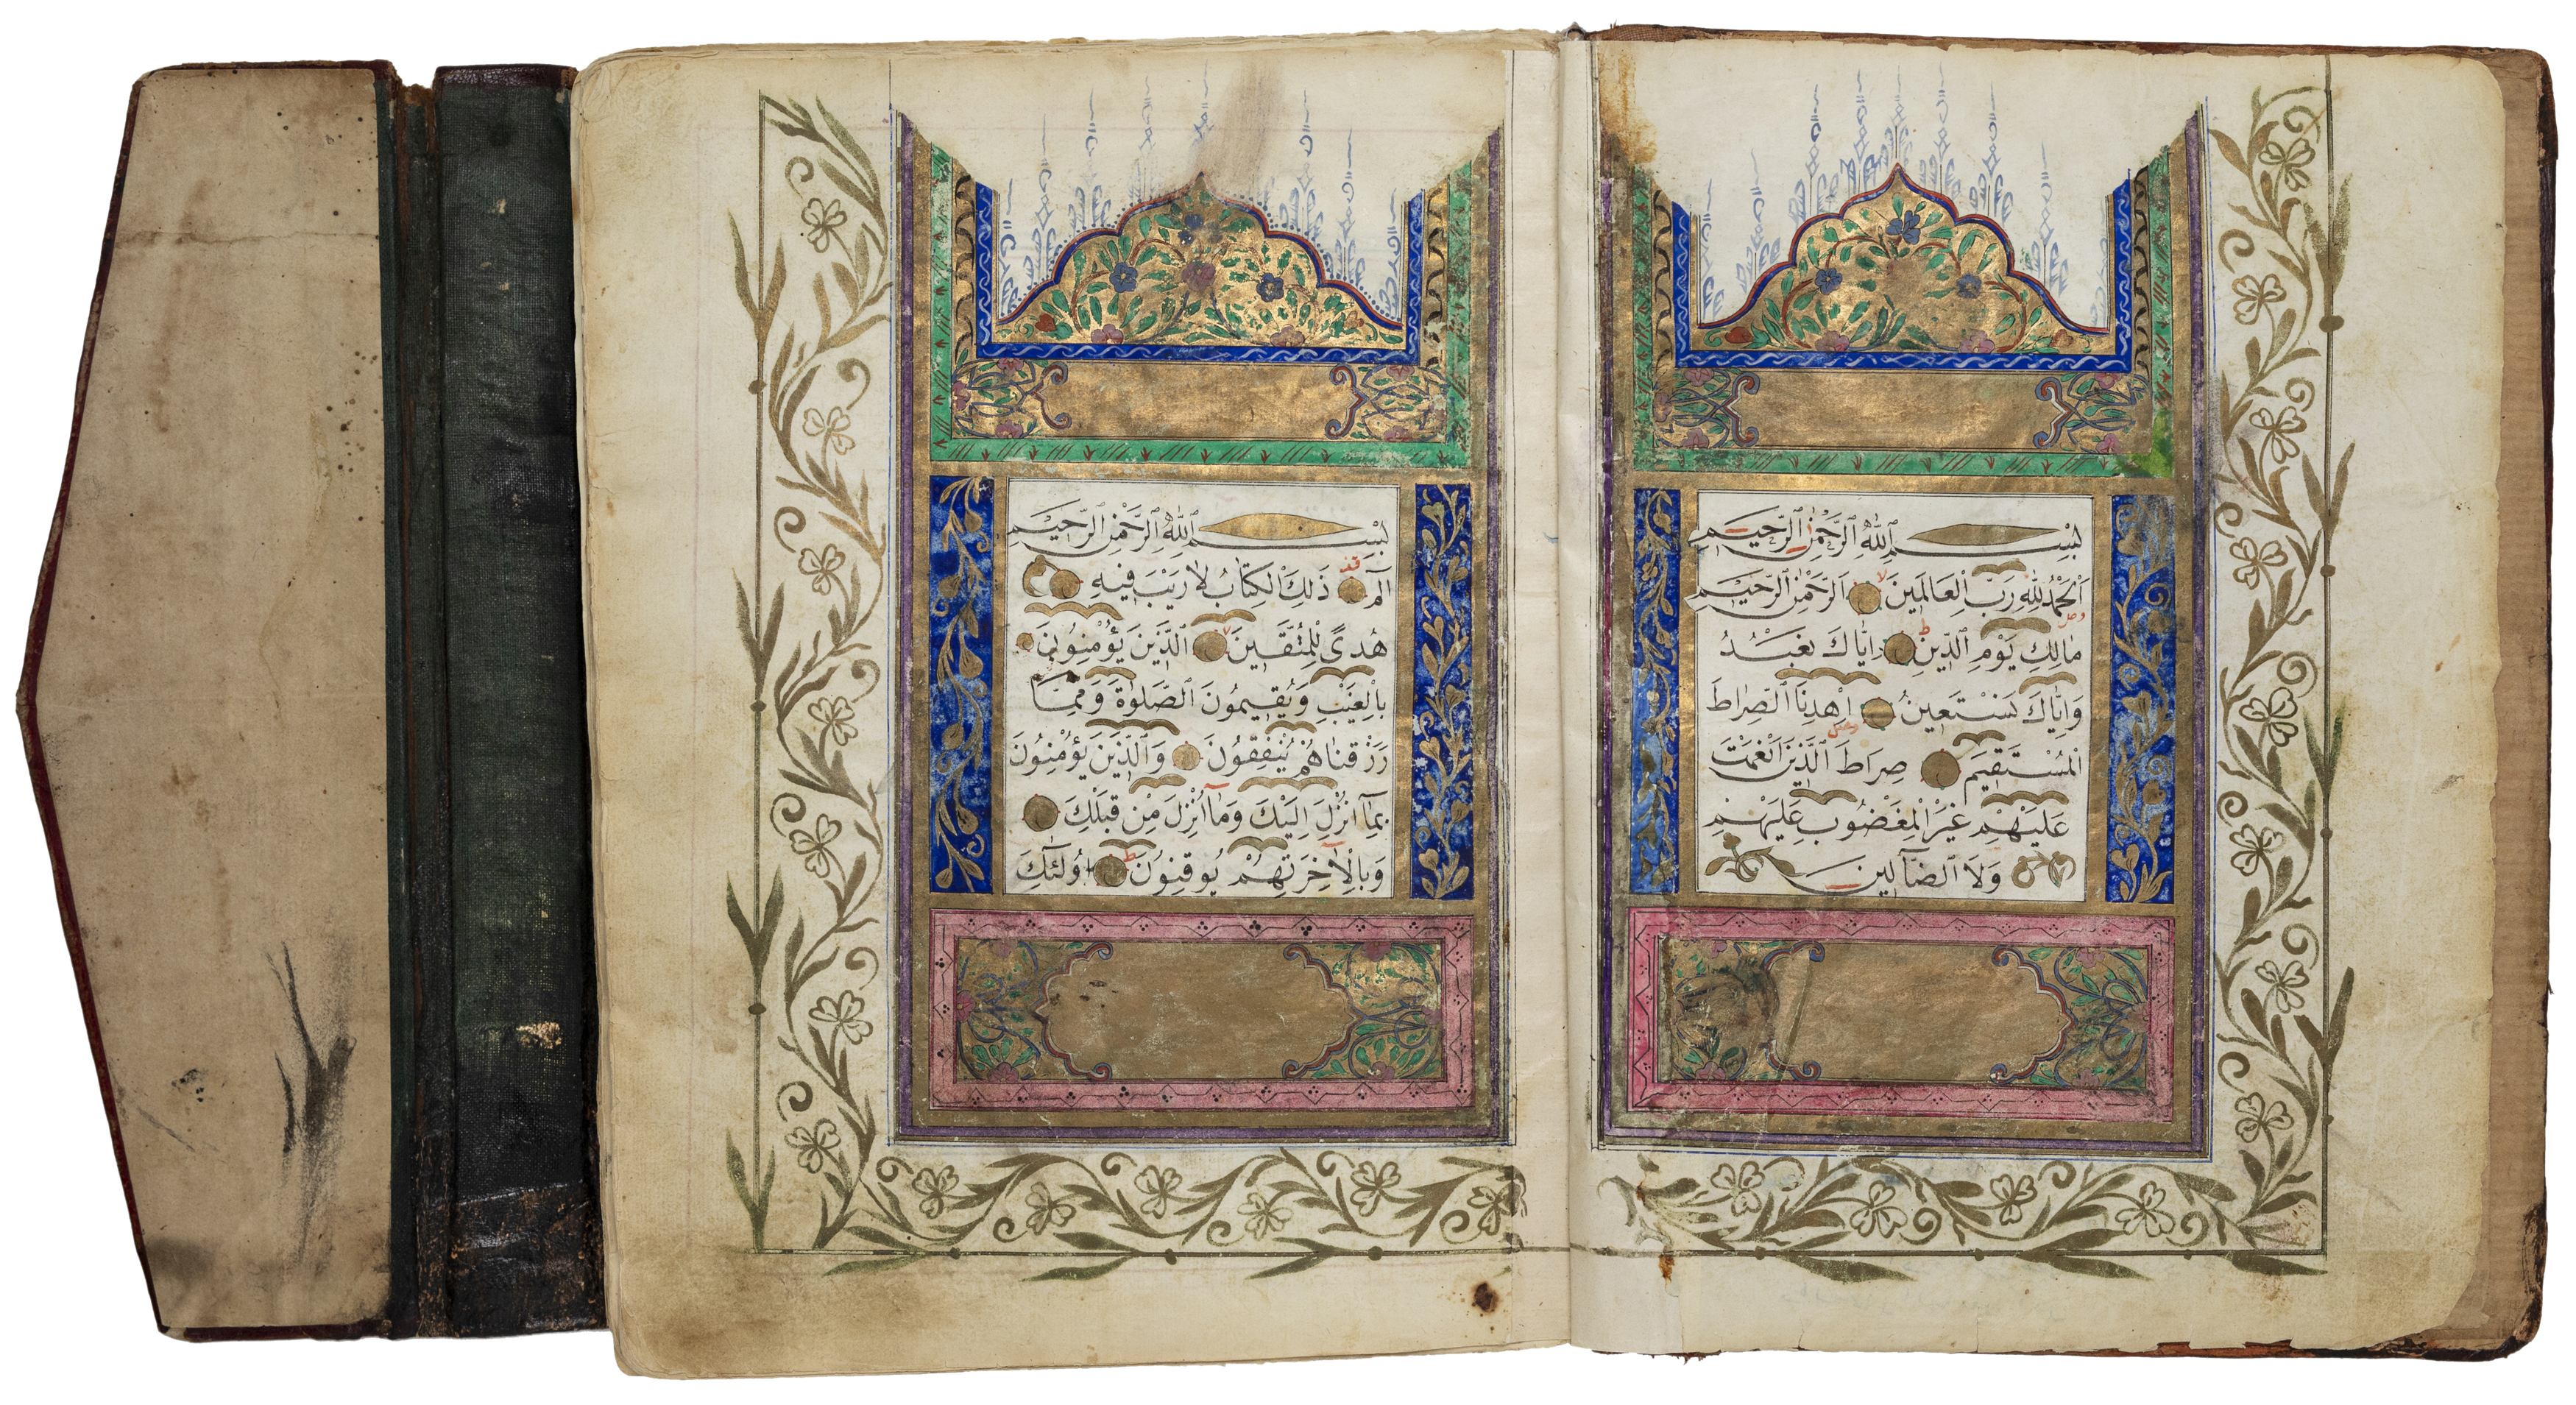 A Qur'an, possibly Balkans, Western Ottoman provinces, dated AH 1267/1850-1 AD, Arabic text on ... - Image 4 of 8